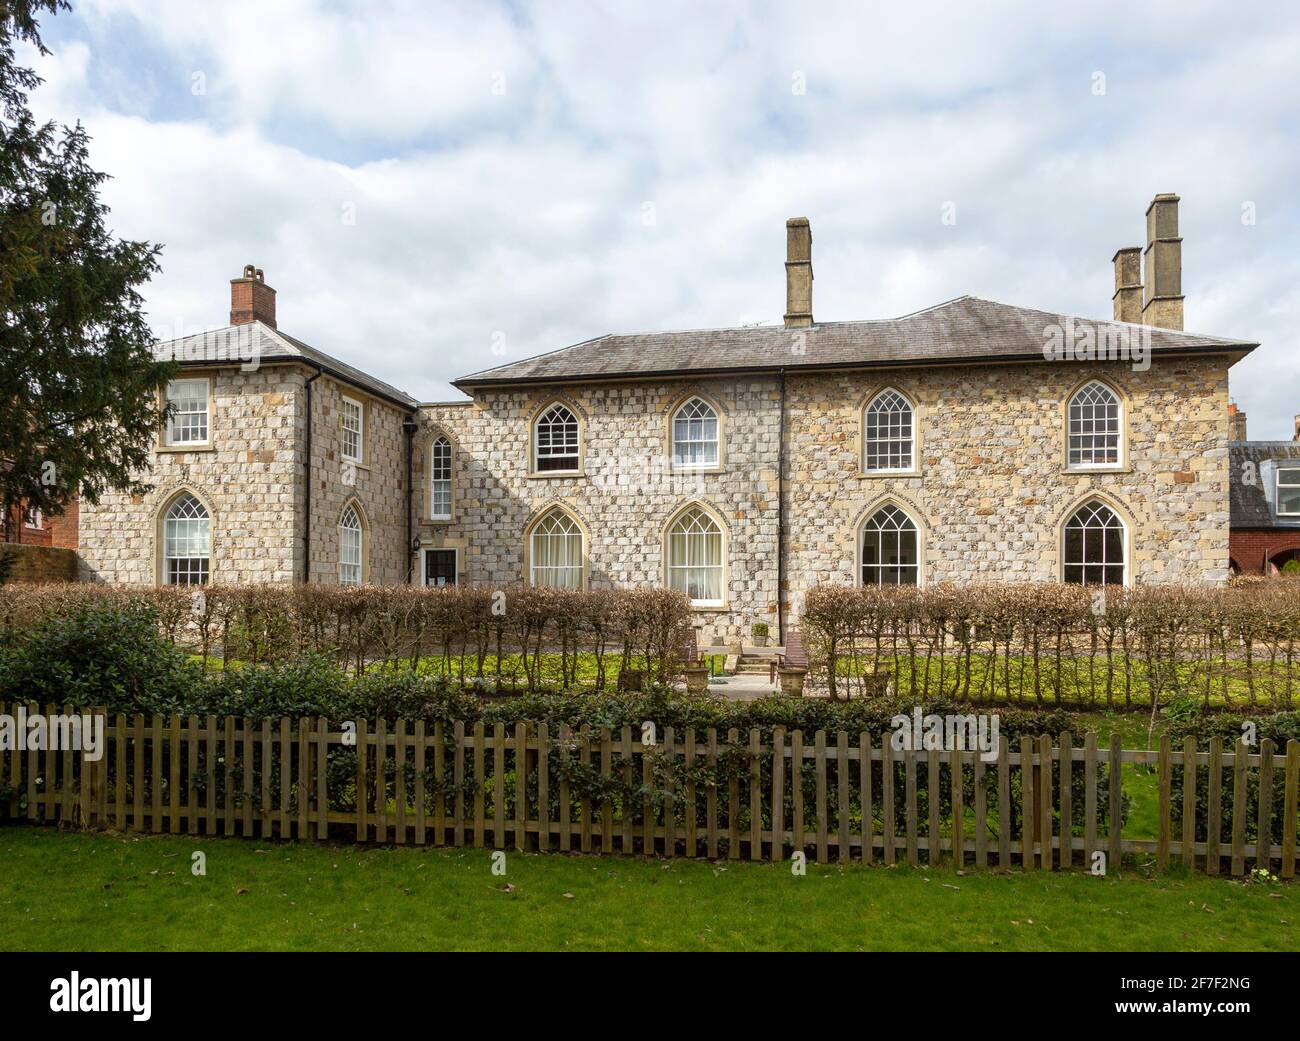 Chequer stone and flint Gothic style architecture, The Priory, Marlborough, Wiltshire, England, UK Stock Photo